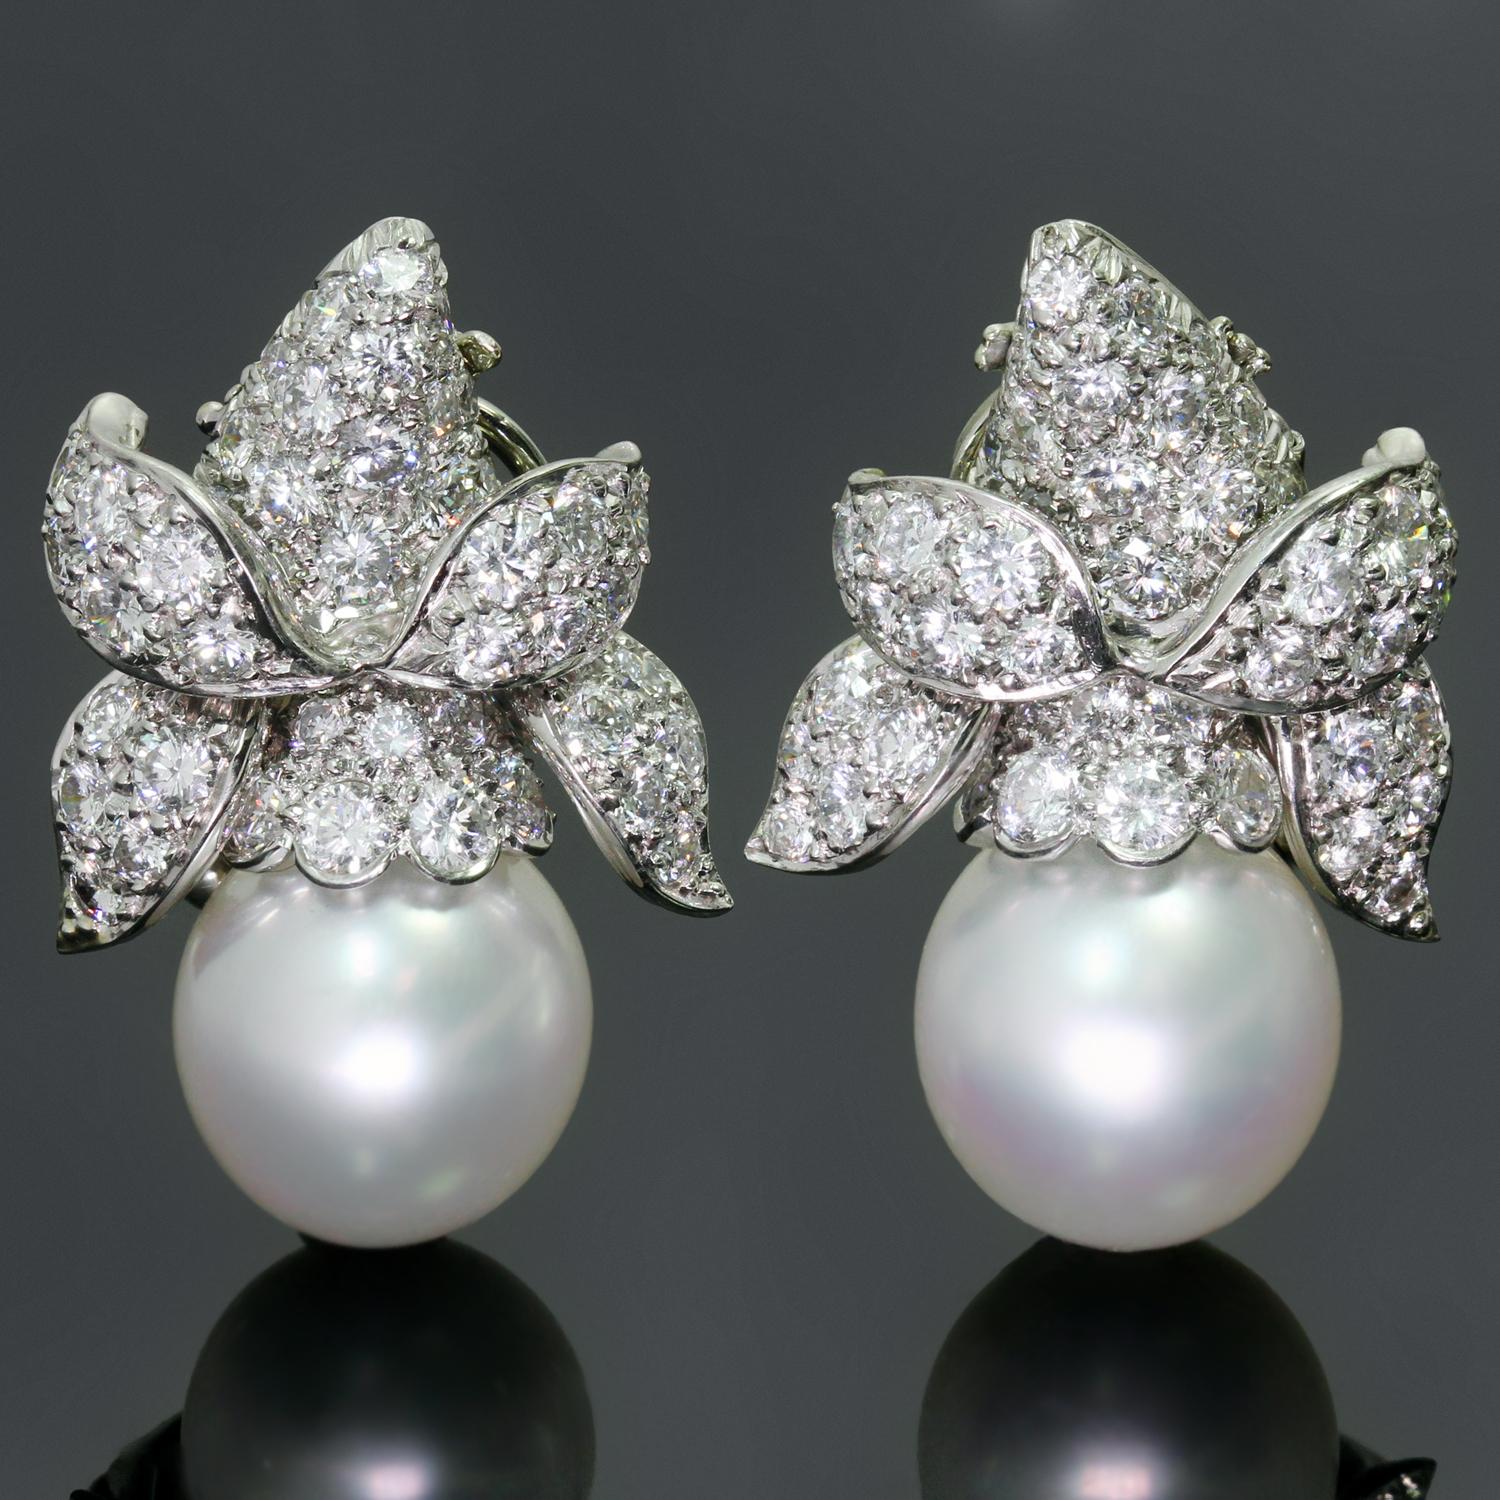 These magnificent Van Cleef & Arpels clip-on earrings feature a floral design crafted in 950 platinum and set with 80 brilliant-cut round diamonds of an estimated 5.0 - 5.50 carats and completed with detachable clean, pure white, high luster South